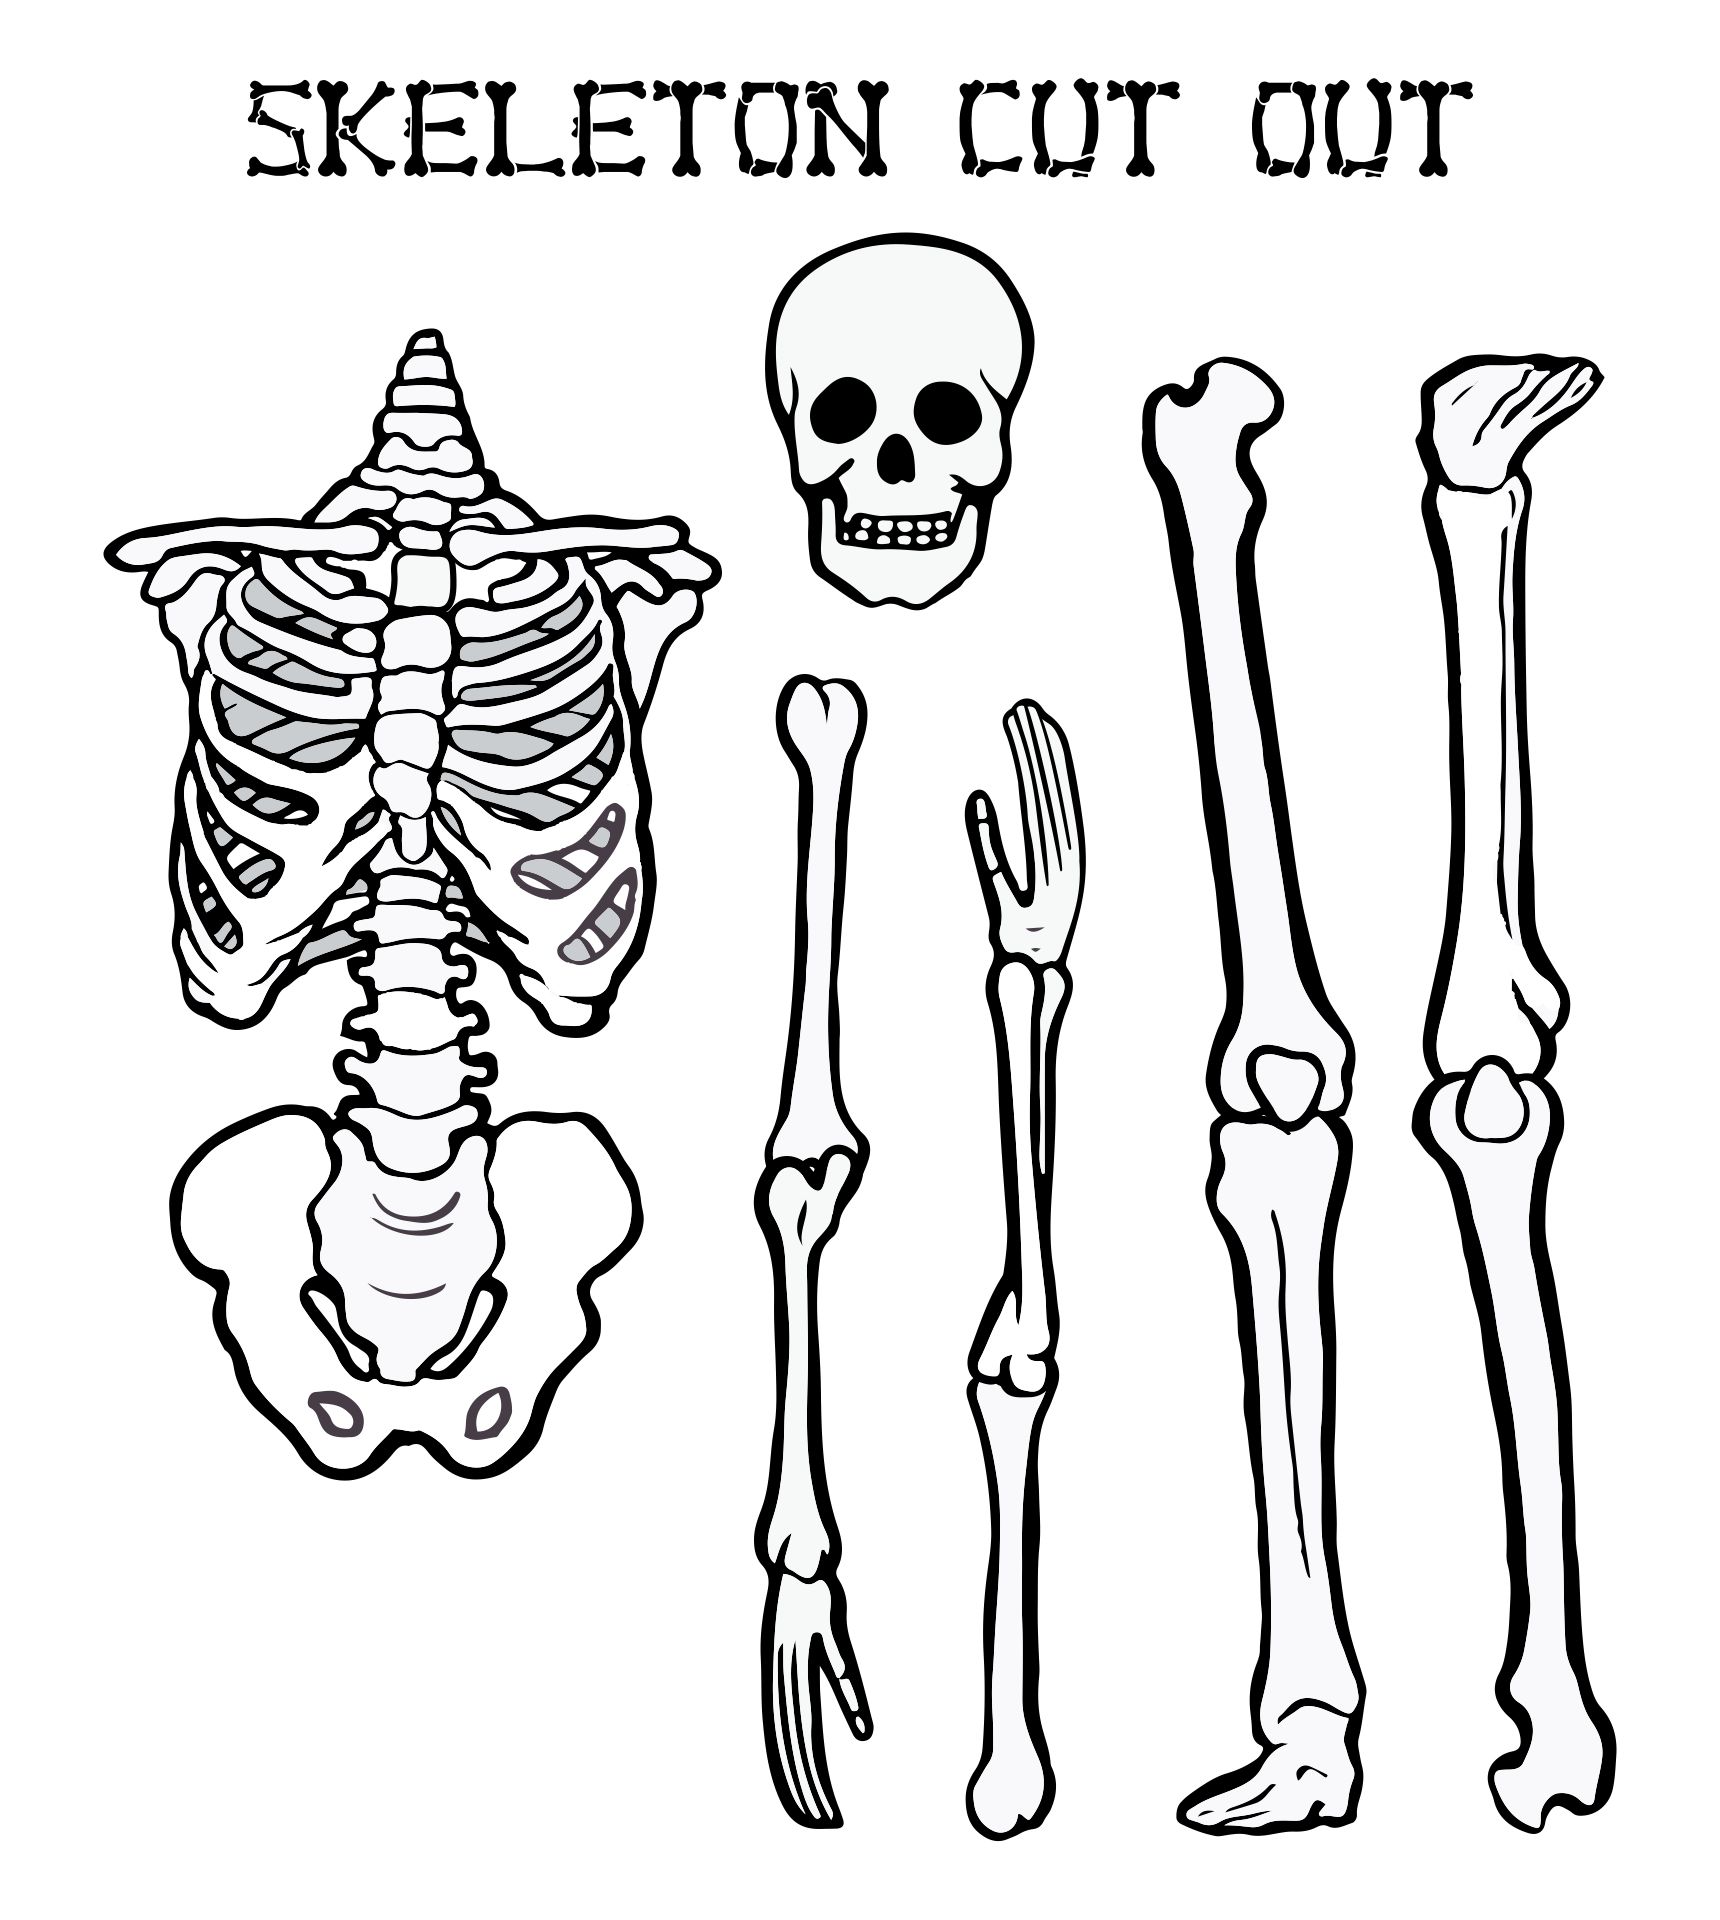 Mr. Skeleton Pattern And Activities